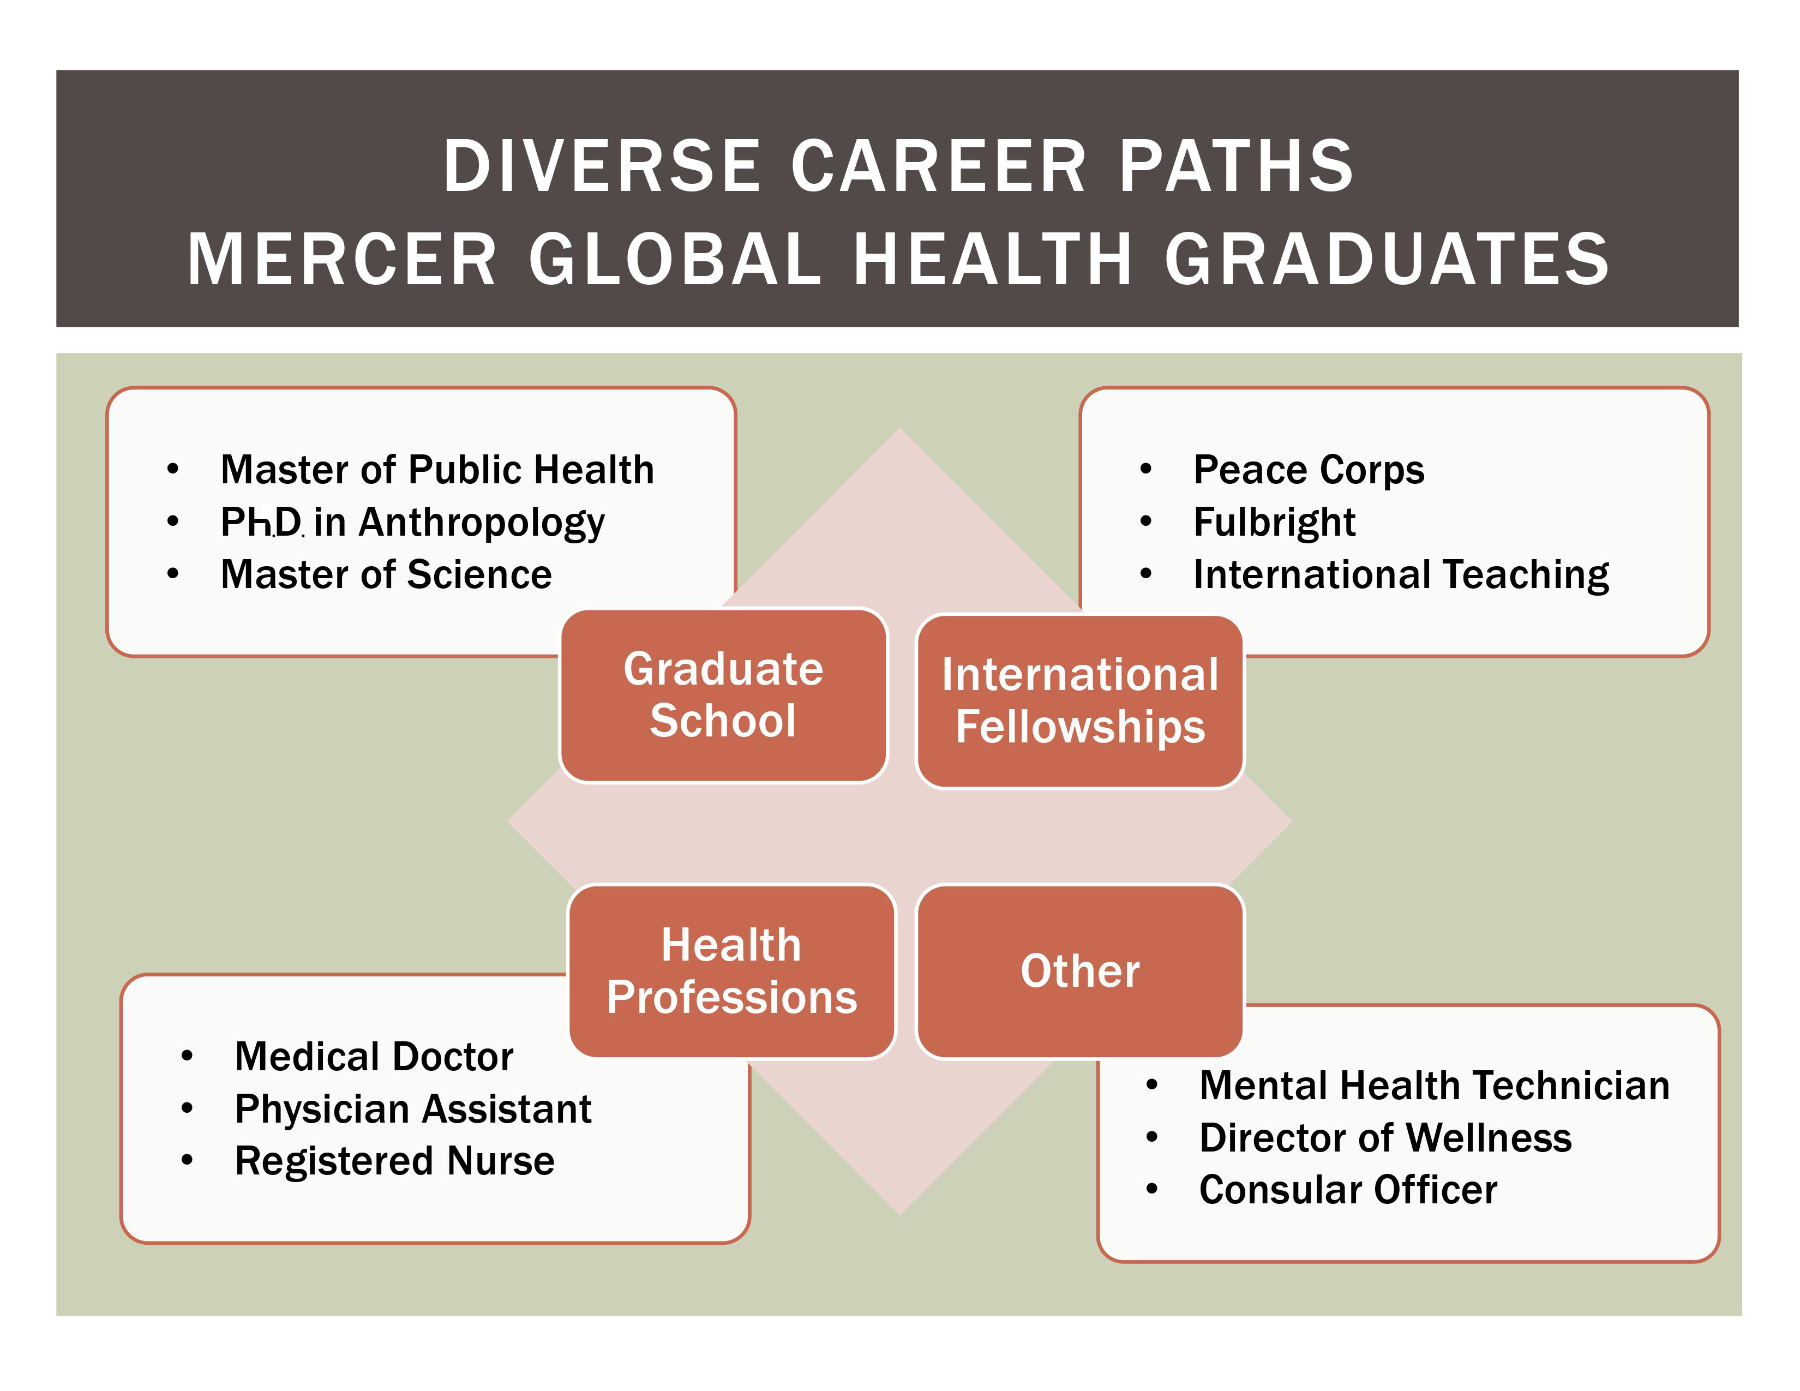 Infographic titled "Diverse Career Paths Mercer Global Health Graduates." There are four central boxes: Graduate School, International Fellowships, Health Professions, and Other. Off of Graduate School, there is another box that lists Master of Public Health, Ph.D. in Anthropology, and Master of Science. Off of International Fellowships, there is another box that lists Peace Corps, Fulbright, and International Teaching. Off of Health Professions, there is another box that lists Medical Doctor, Physician Assistant, and Registered Nurse. Off of Other there is another box that lists Mental Health Technician, Director of Wellness, and Consular Officer. The layout represents potential career paths for graduates.